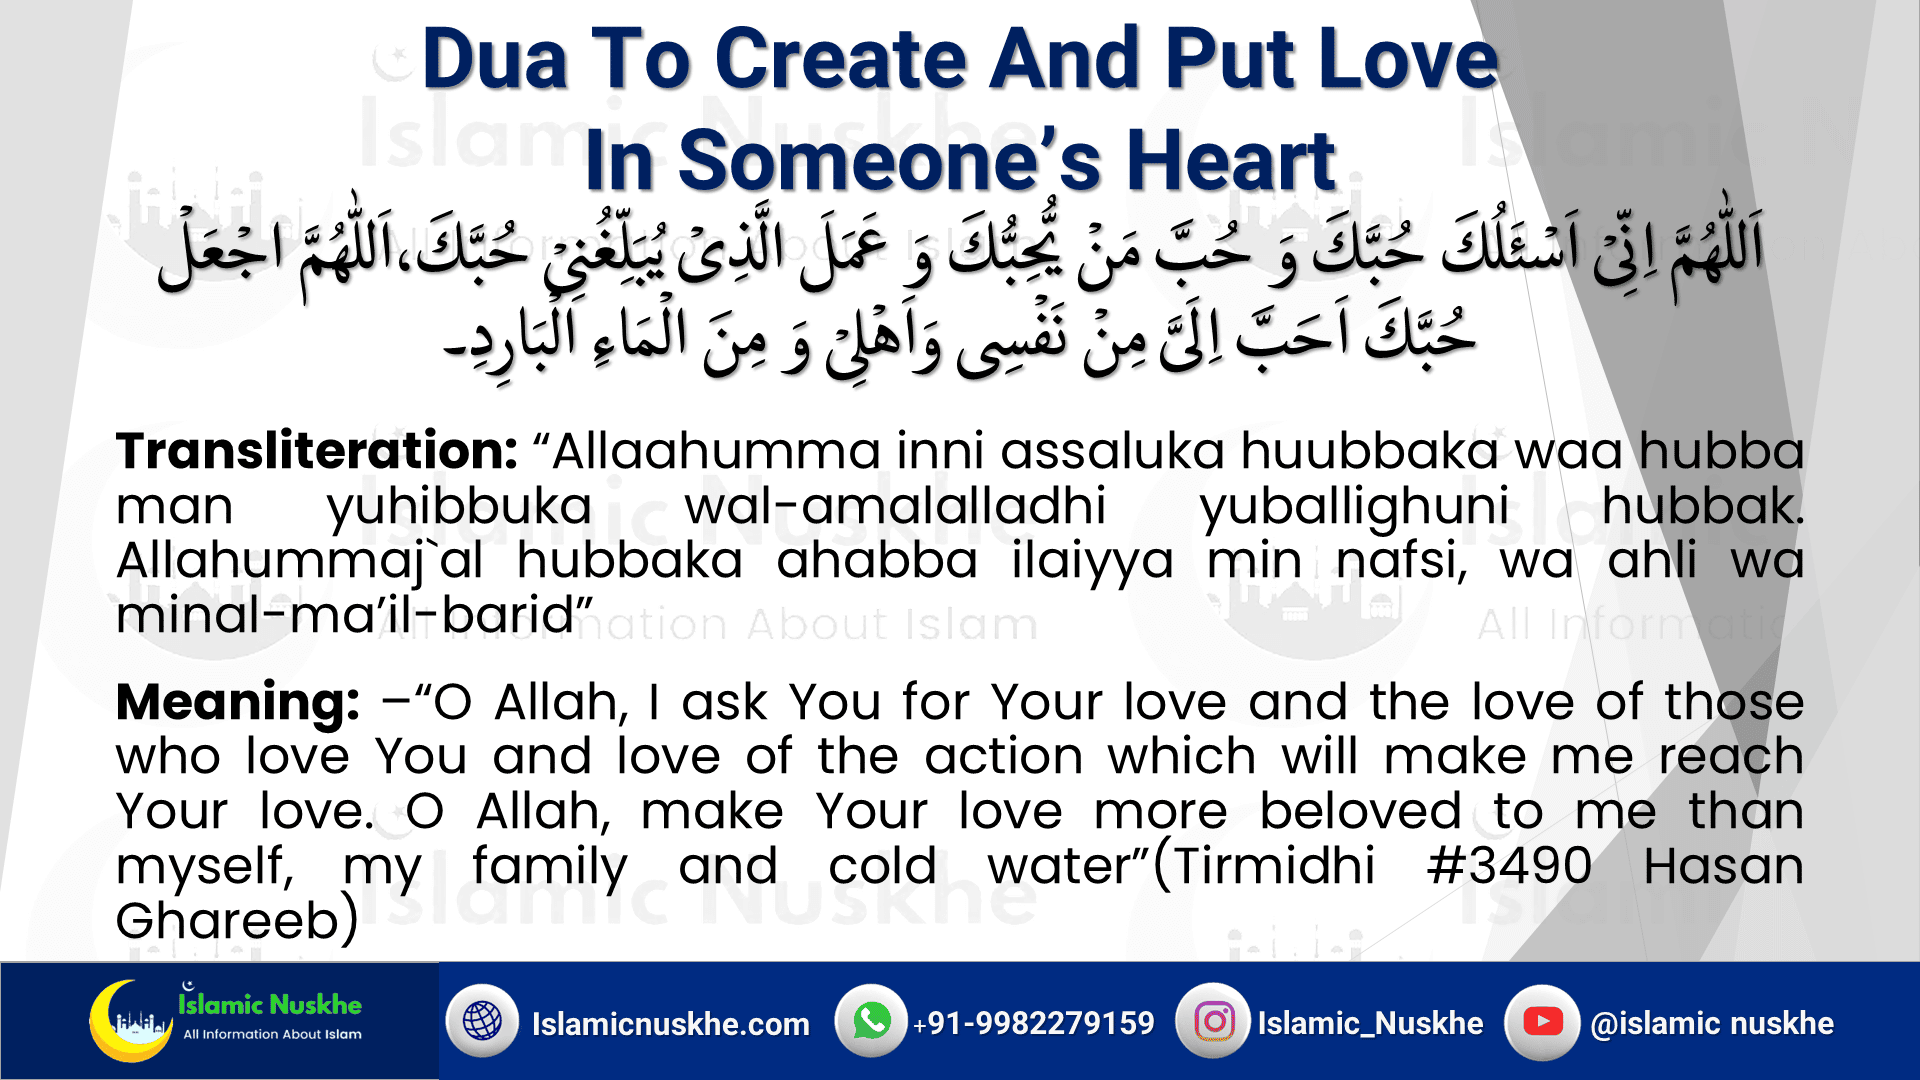 Dua To Create And Put Love In Someone's Heart